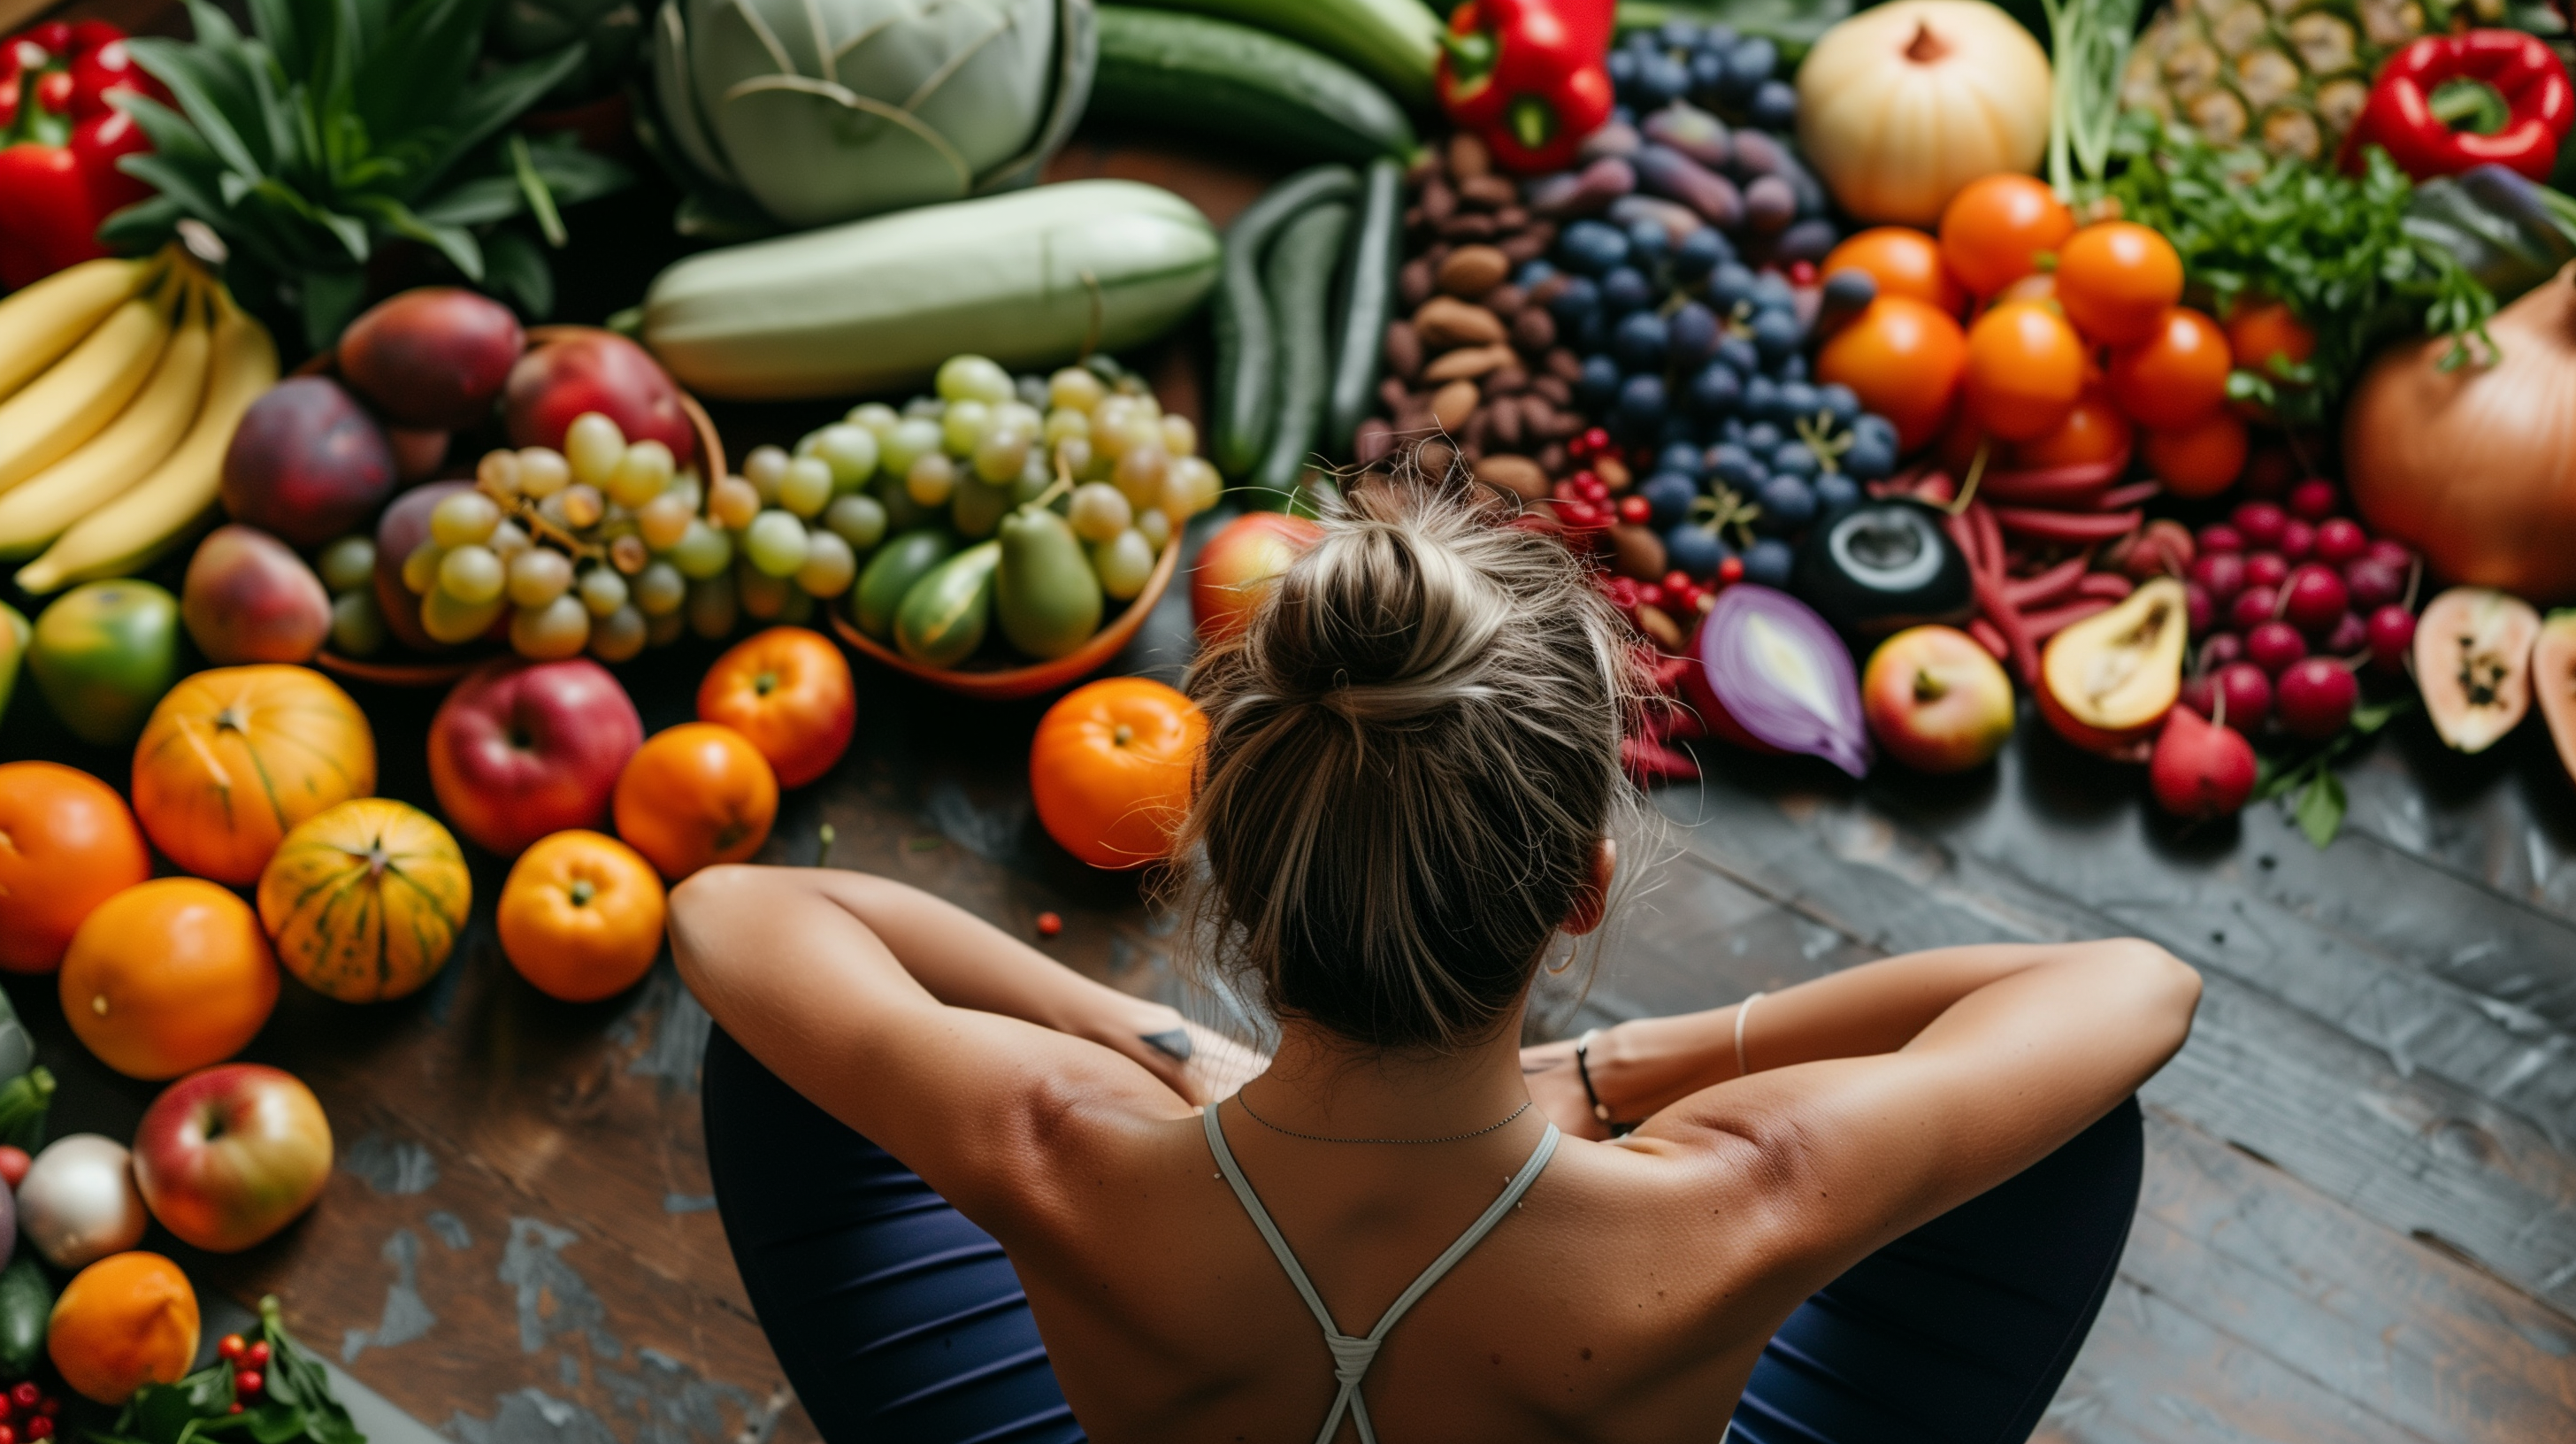 a serene person in a relaxed yoga pose, surrounded by vibrant fruits and vegetables